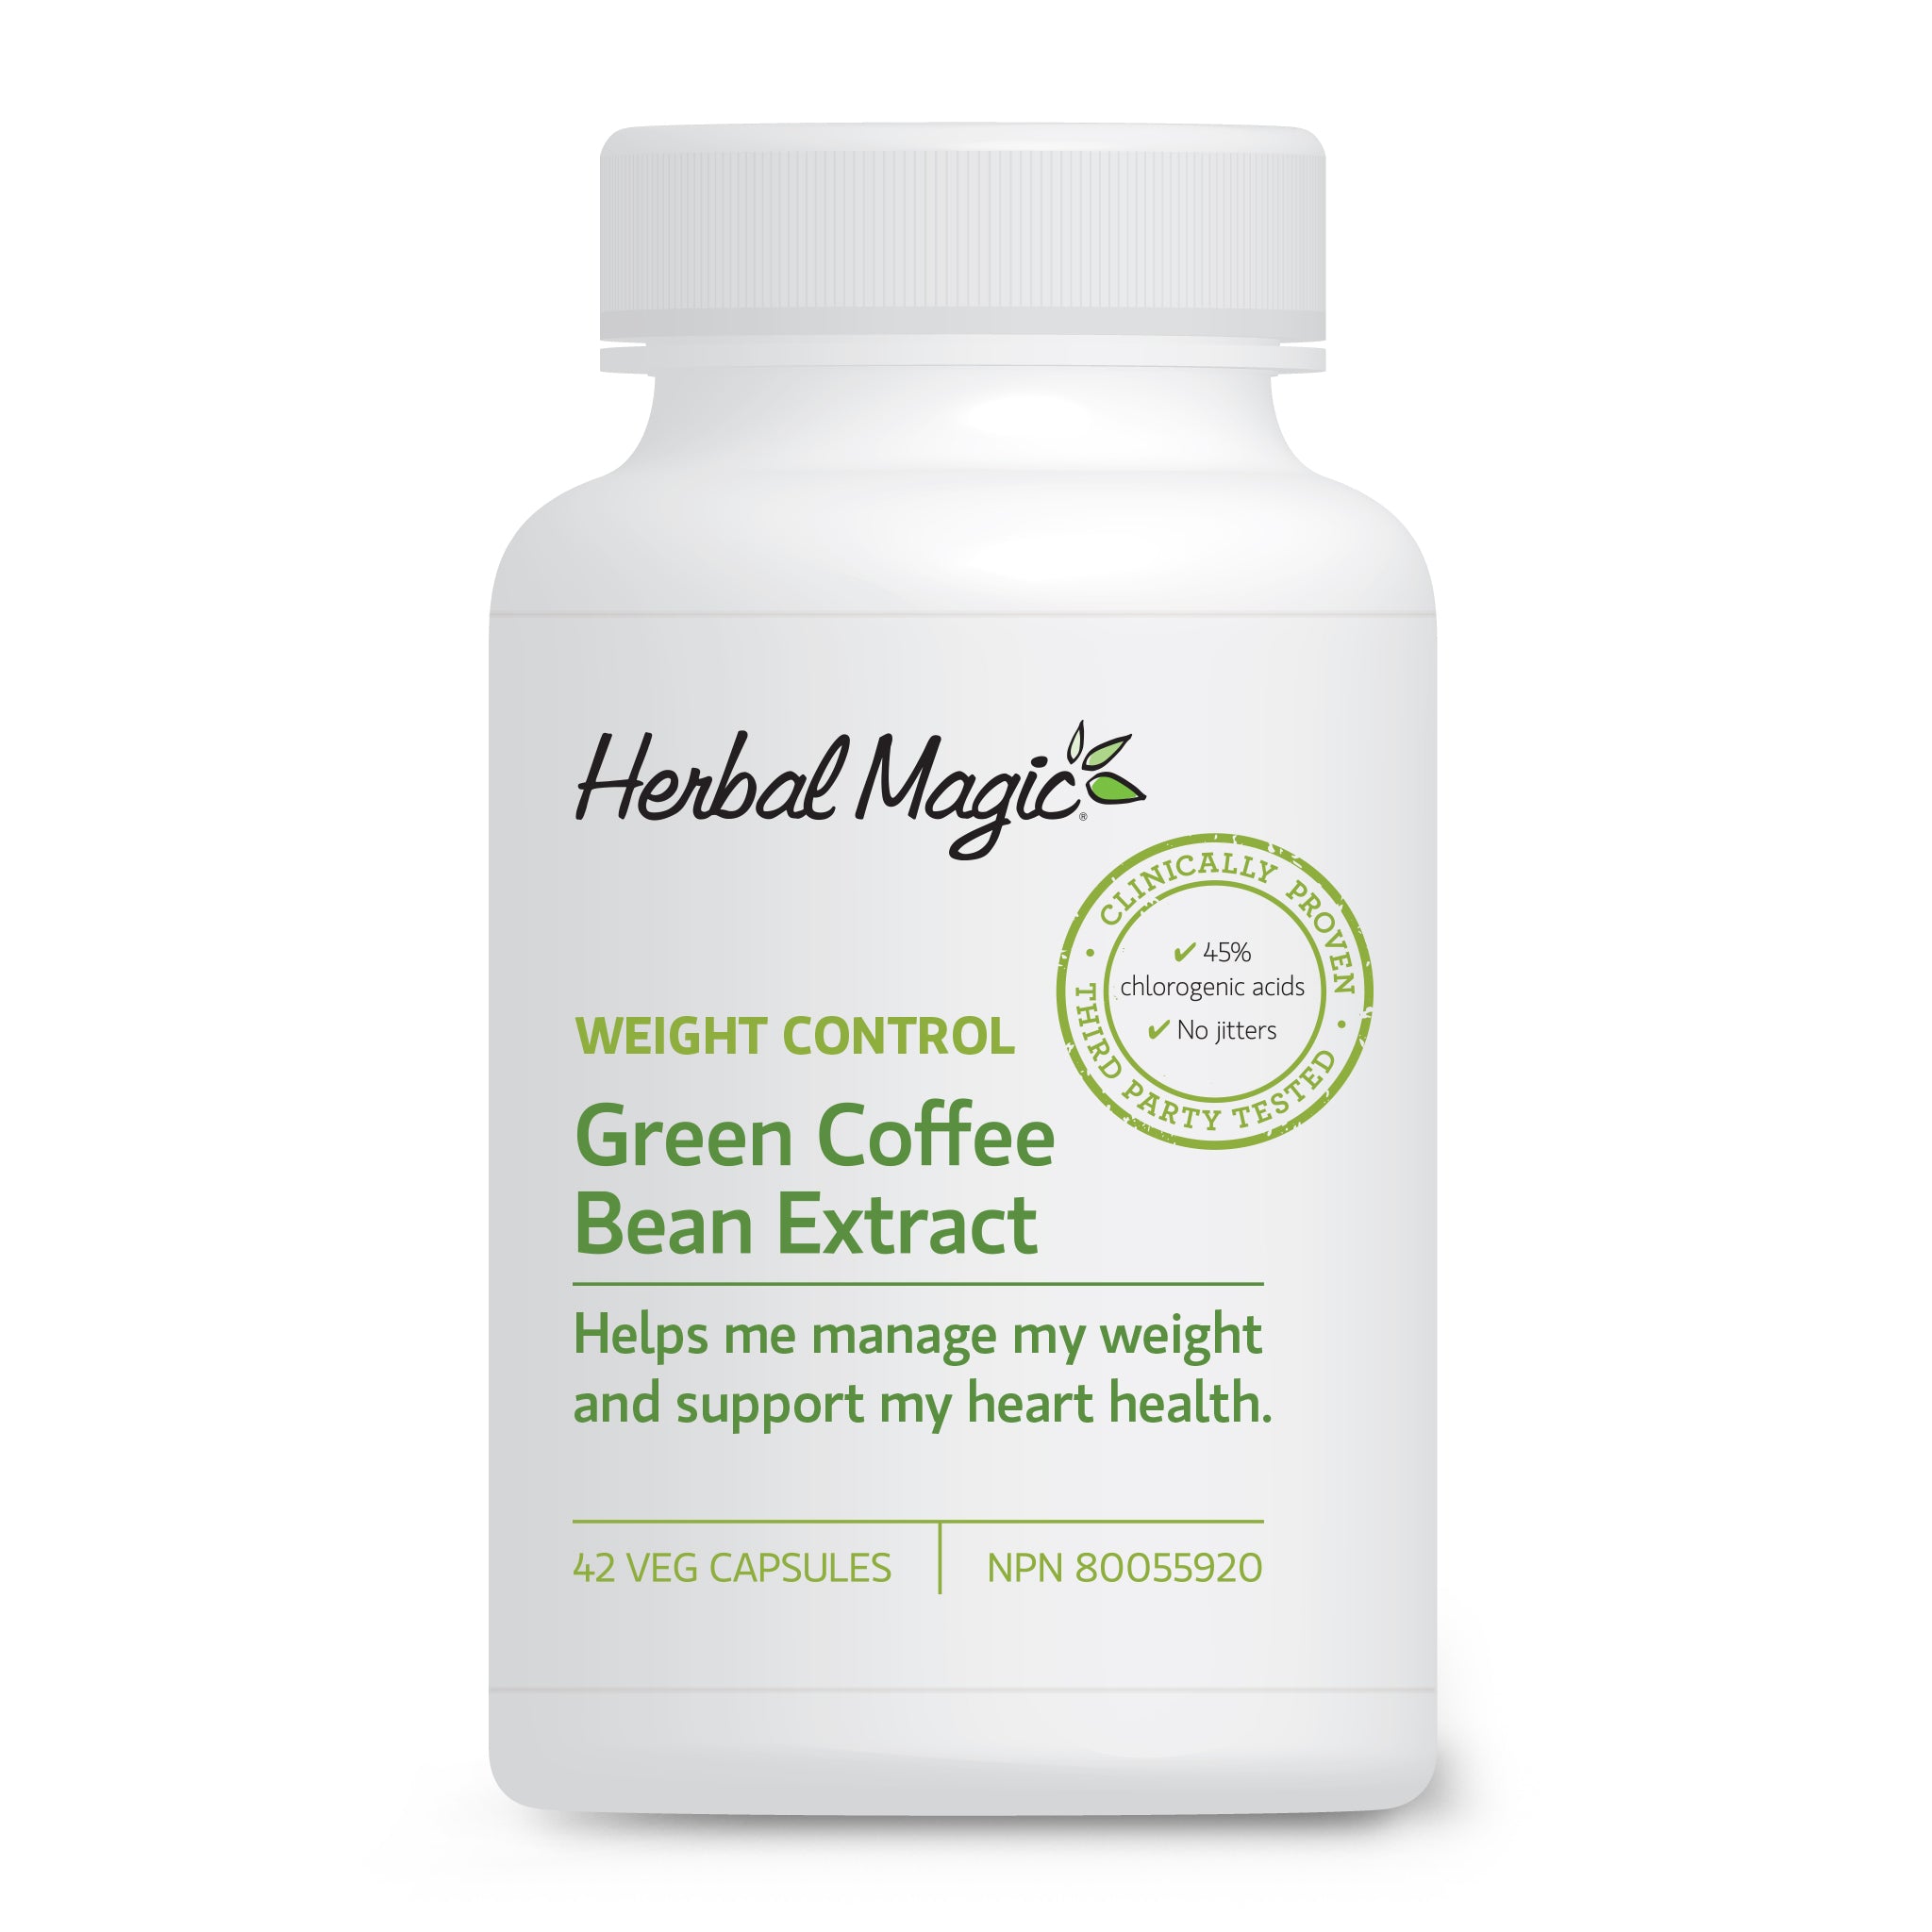 Herbal Magic's Green Coffee Bean Extract helps reduce body weight. 